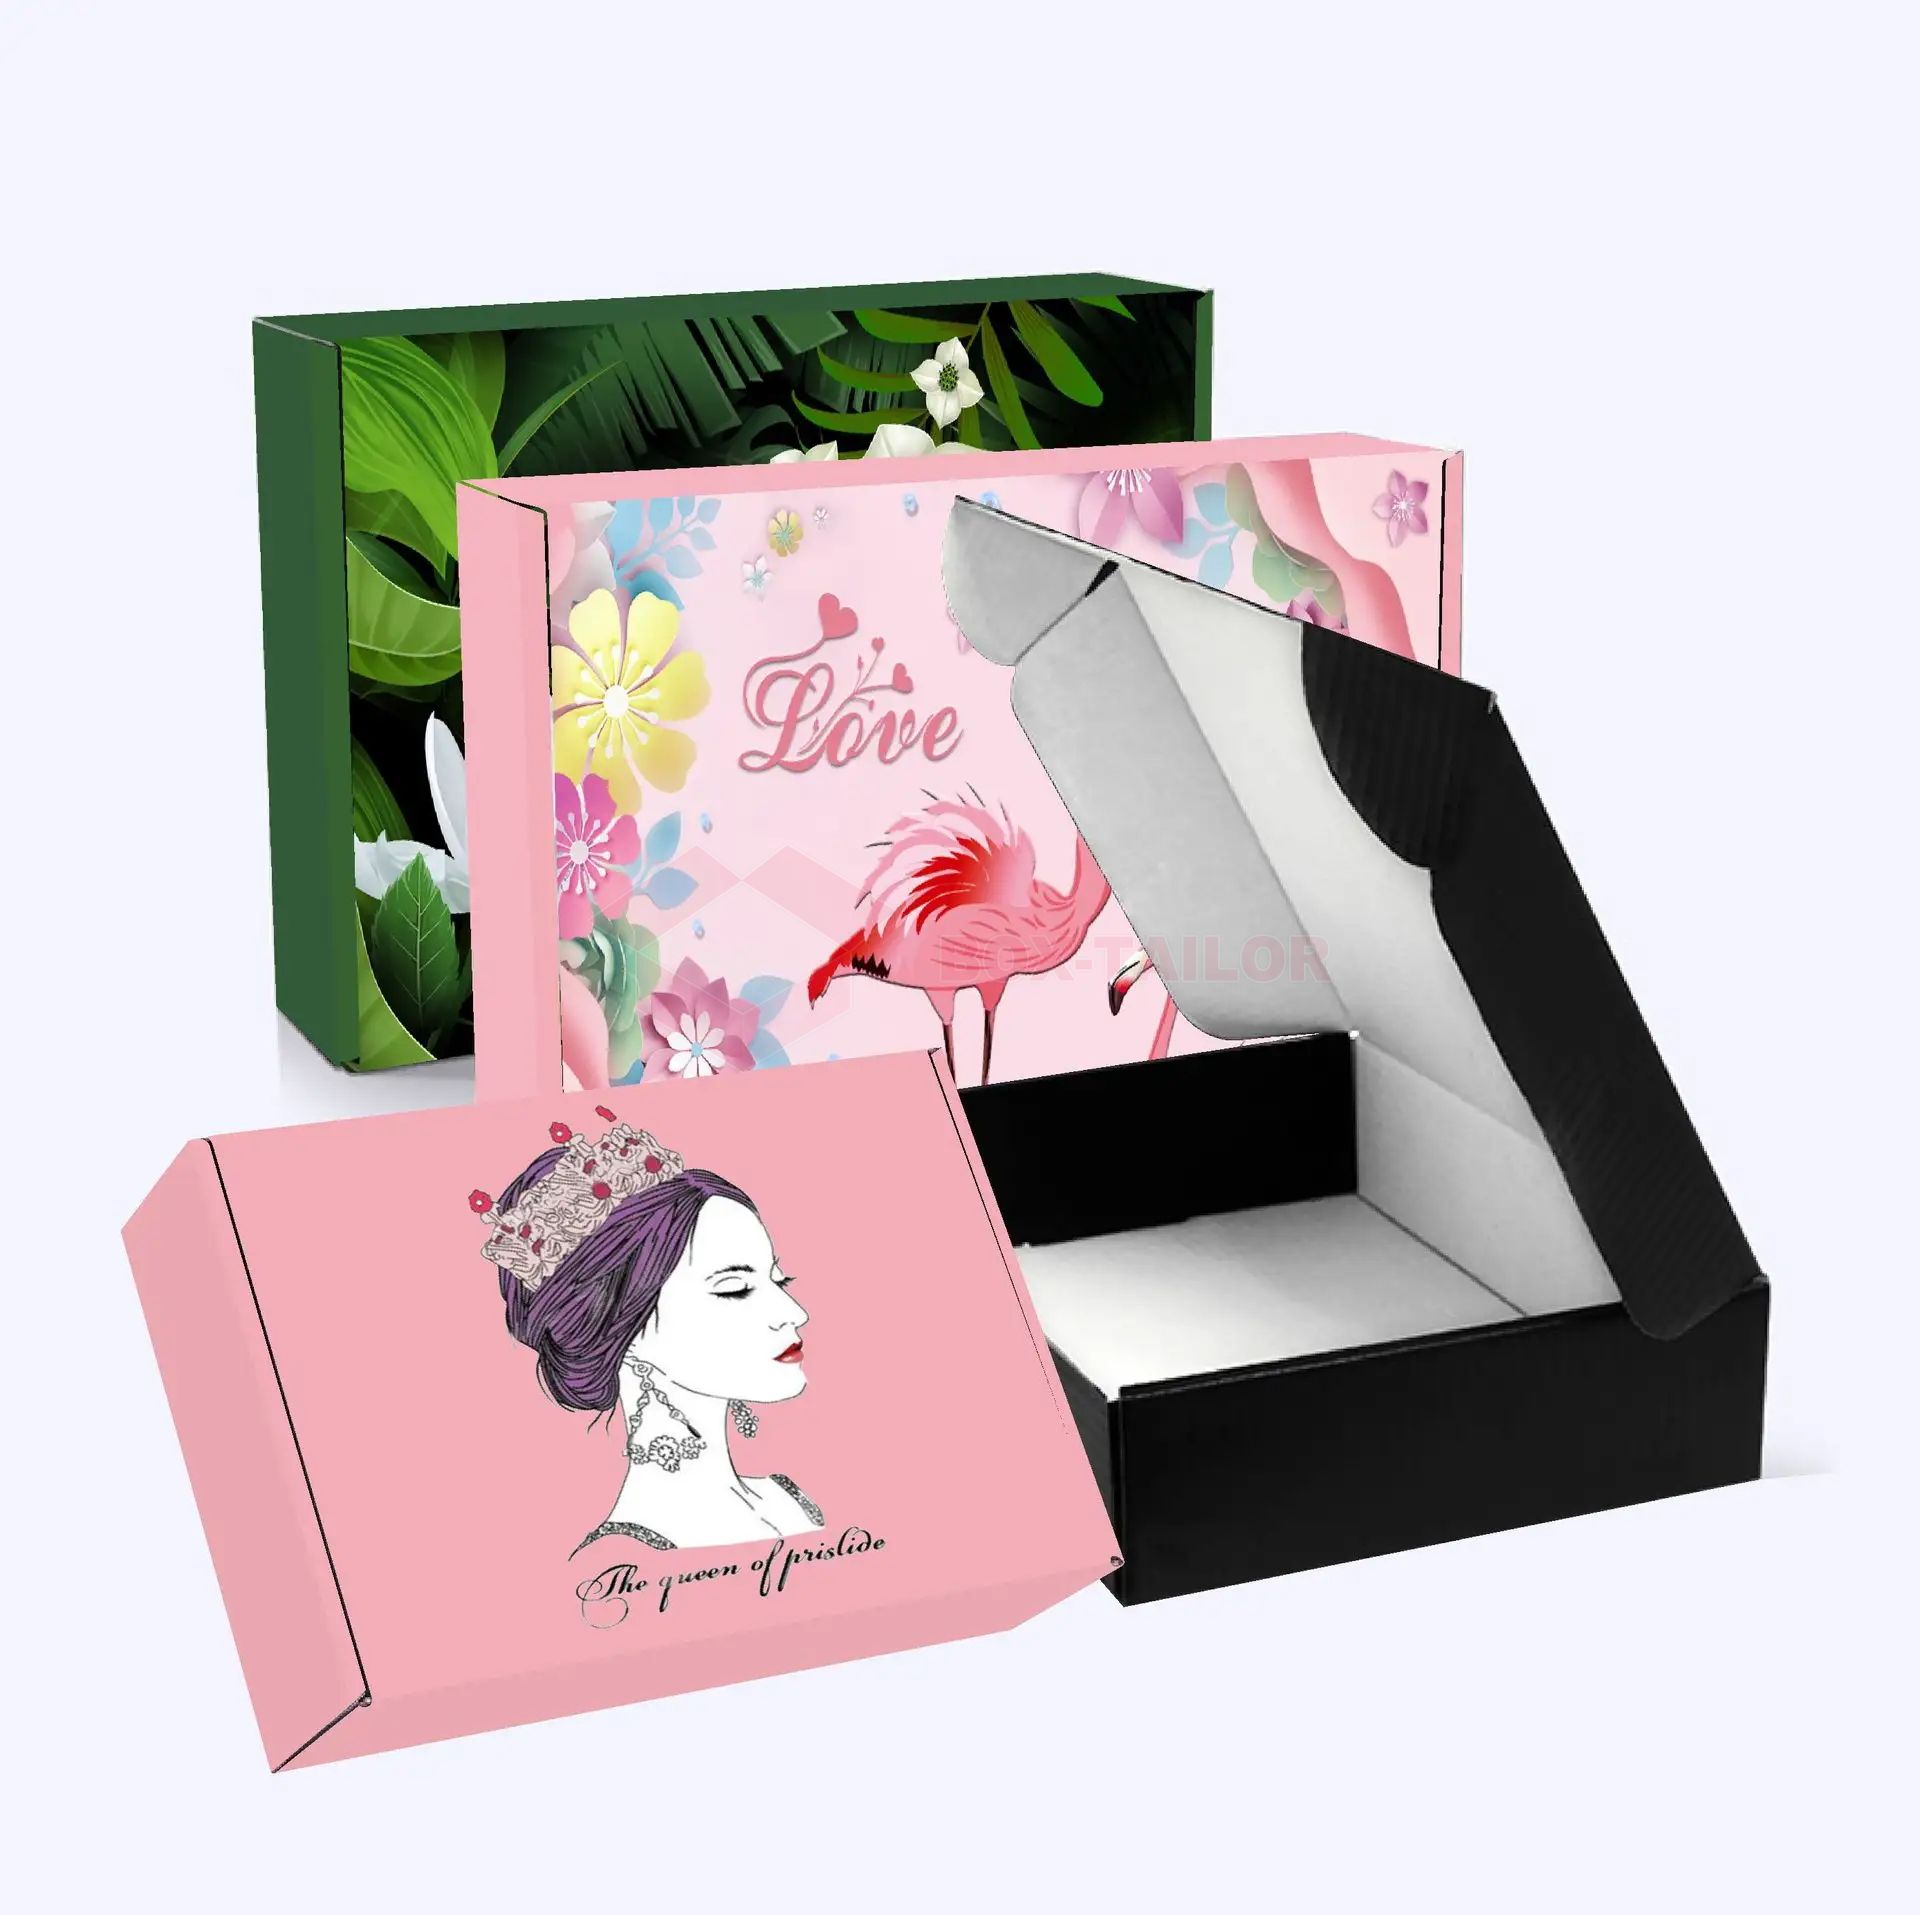 Customized Clothing Packaging Boxes, Clothing Box Design